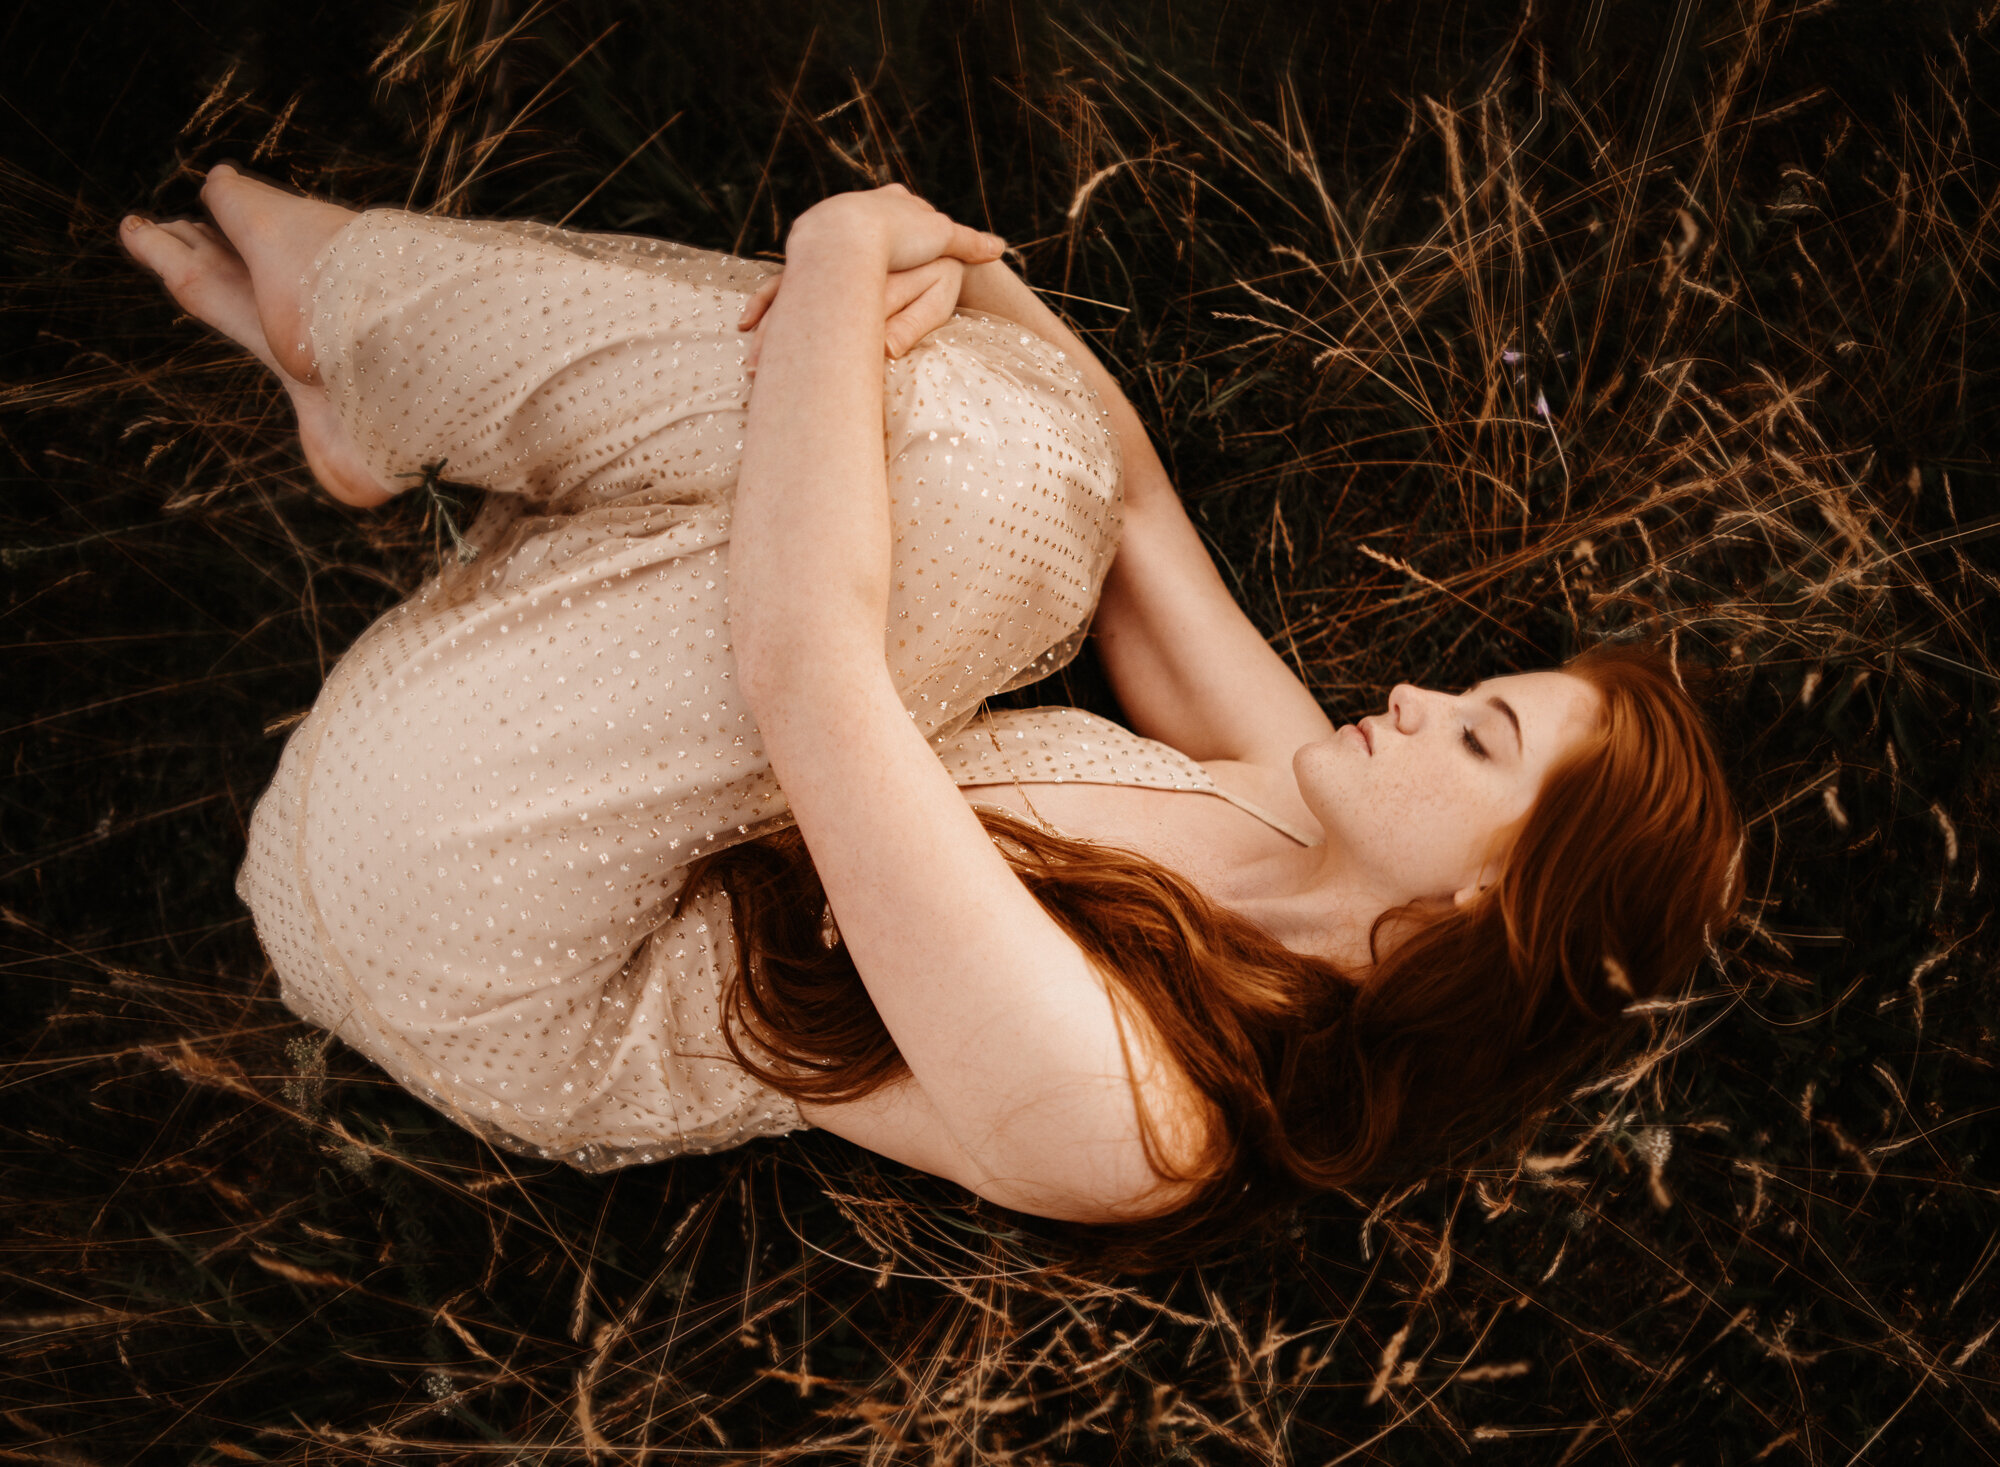  Young red head girl wearing a gold sparkling dress in a wild flower field in summer during sunset for her fine art portrait photo session by ramstein kmc photographer sarah havens, Kaiserslautern Germany 